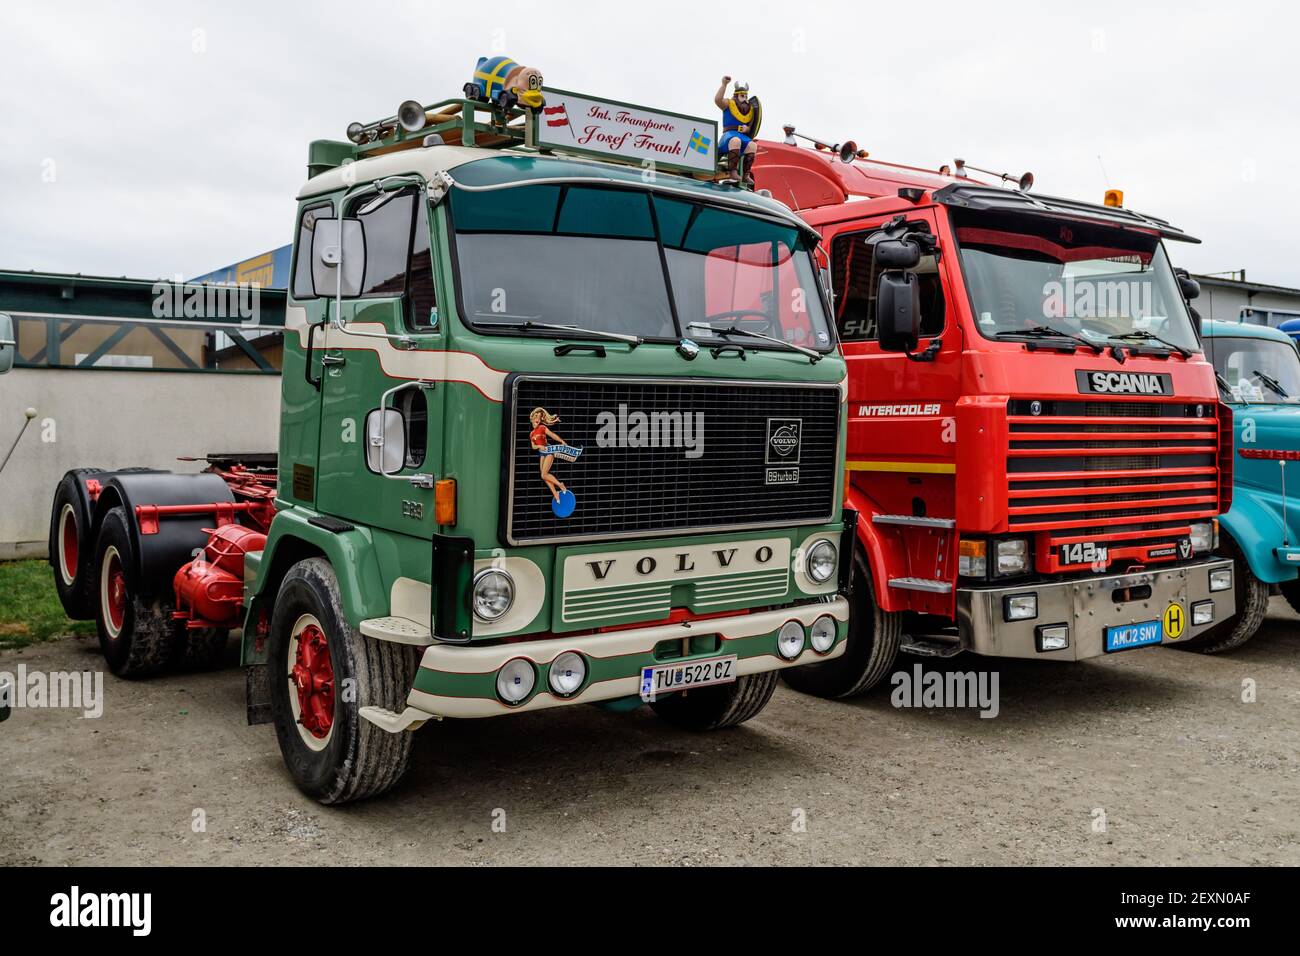 st.valentin, austria, 01 sep 2017, volvo and scania truck at an oldtimer truck meeting, meeting for vintage trucks and tractors Stock Photo